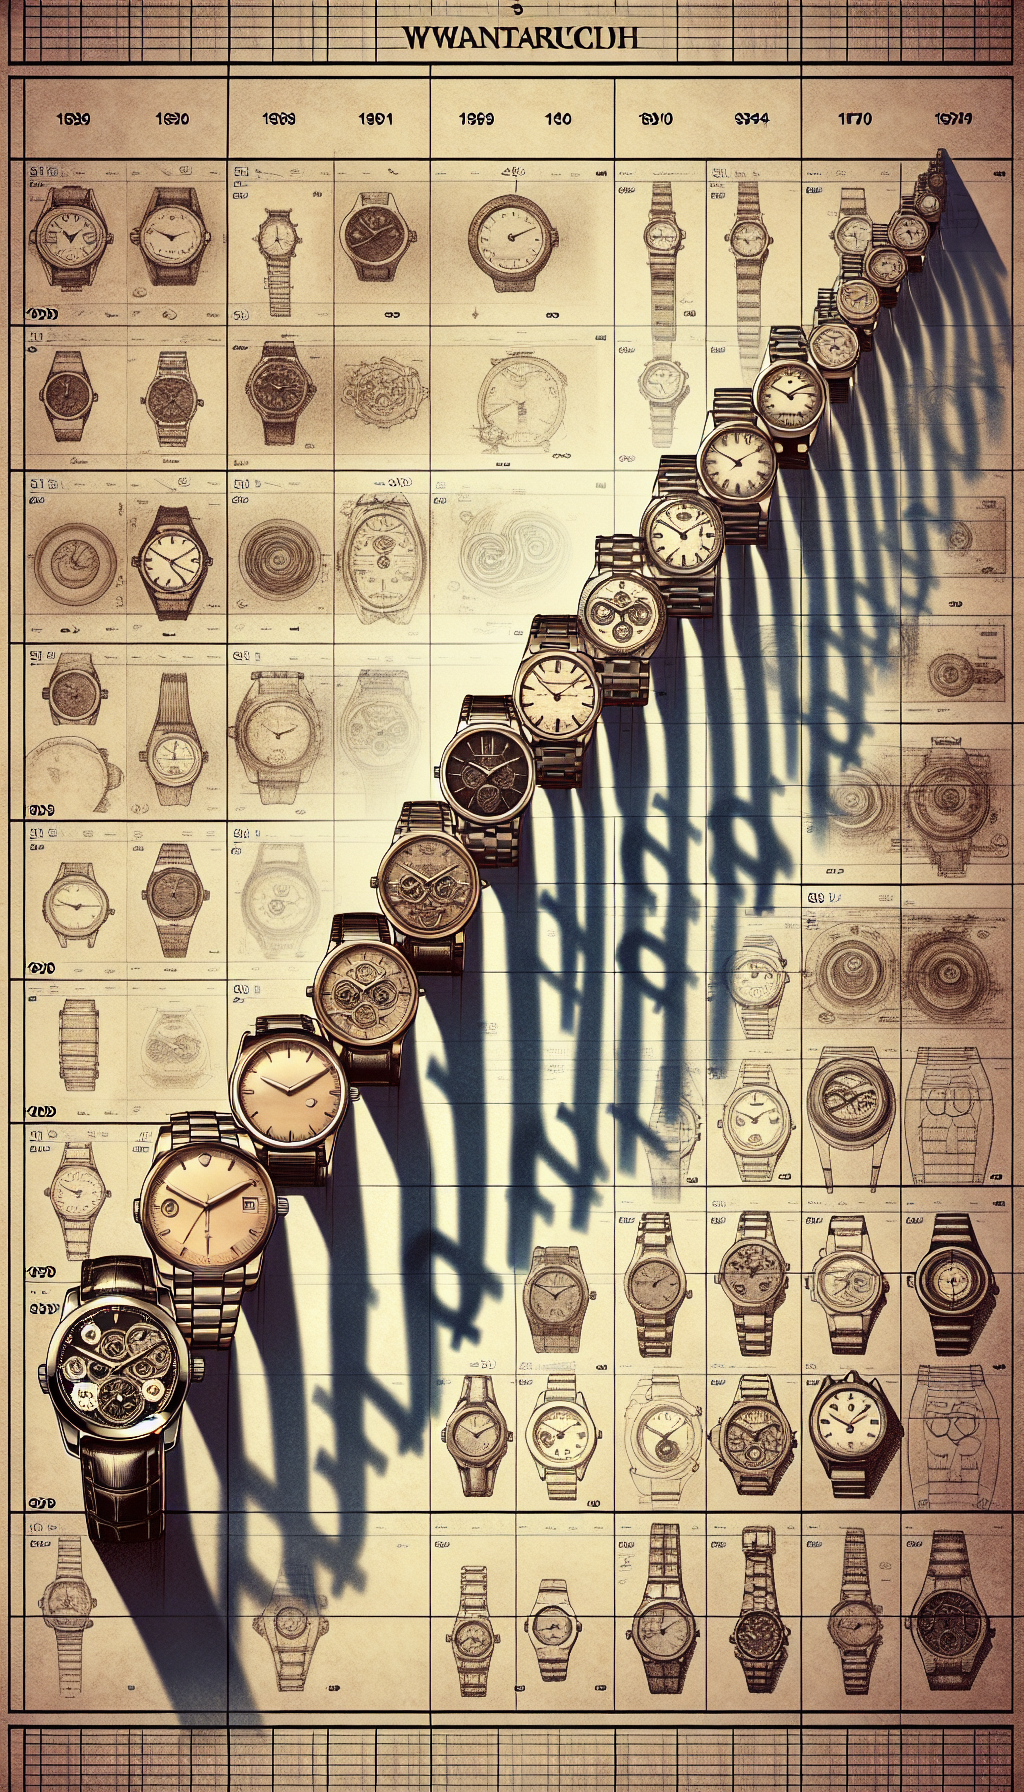 An illustration showcasing a timeline with iconic Pulsar watches, each casting a shadow that morphs into a dollar sign, symbolizing their increasing value over time. The backdrop features faint blueprints and patents, with the oldest models styled in sepia tones, gradually transitioning to full color for contemporary designs, emphasizing the evolution of innovation and the growth of their legacy valuation.